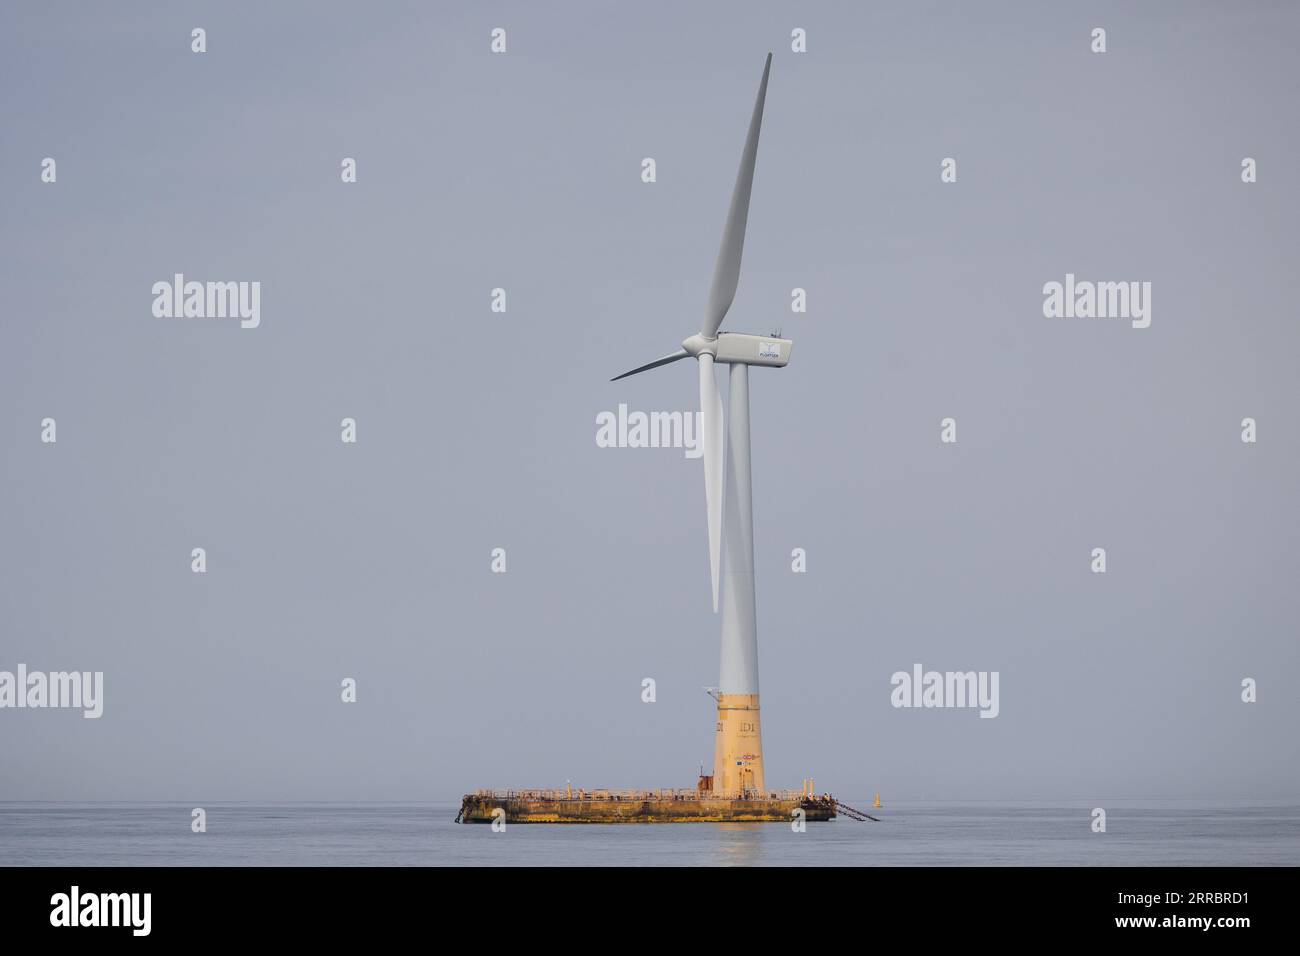 Le Croisic, France. 07th Sep, 2023. This photograph shows the Floatgen floating wind turbine which powers the Lhyfe floating hydrogen production unit (unseen) at the SEM-REV experimentation site off Le Croisic, western France, on September 7, 2023. Photo by Raphael Lafargue/ABACAPRESS.COM Credit: Abaca Press/Alamy Live News Stock Photo